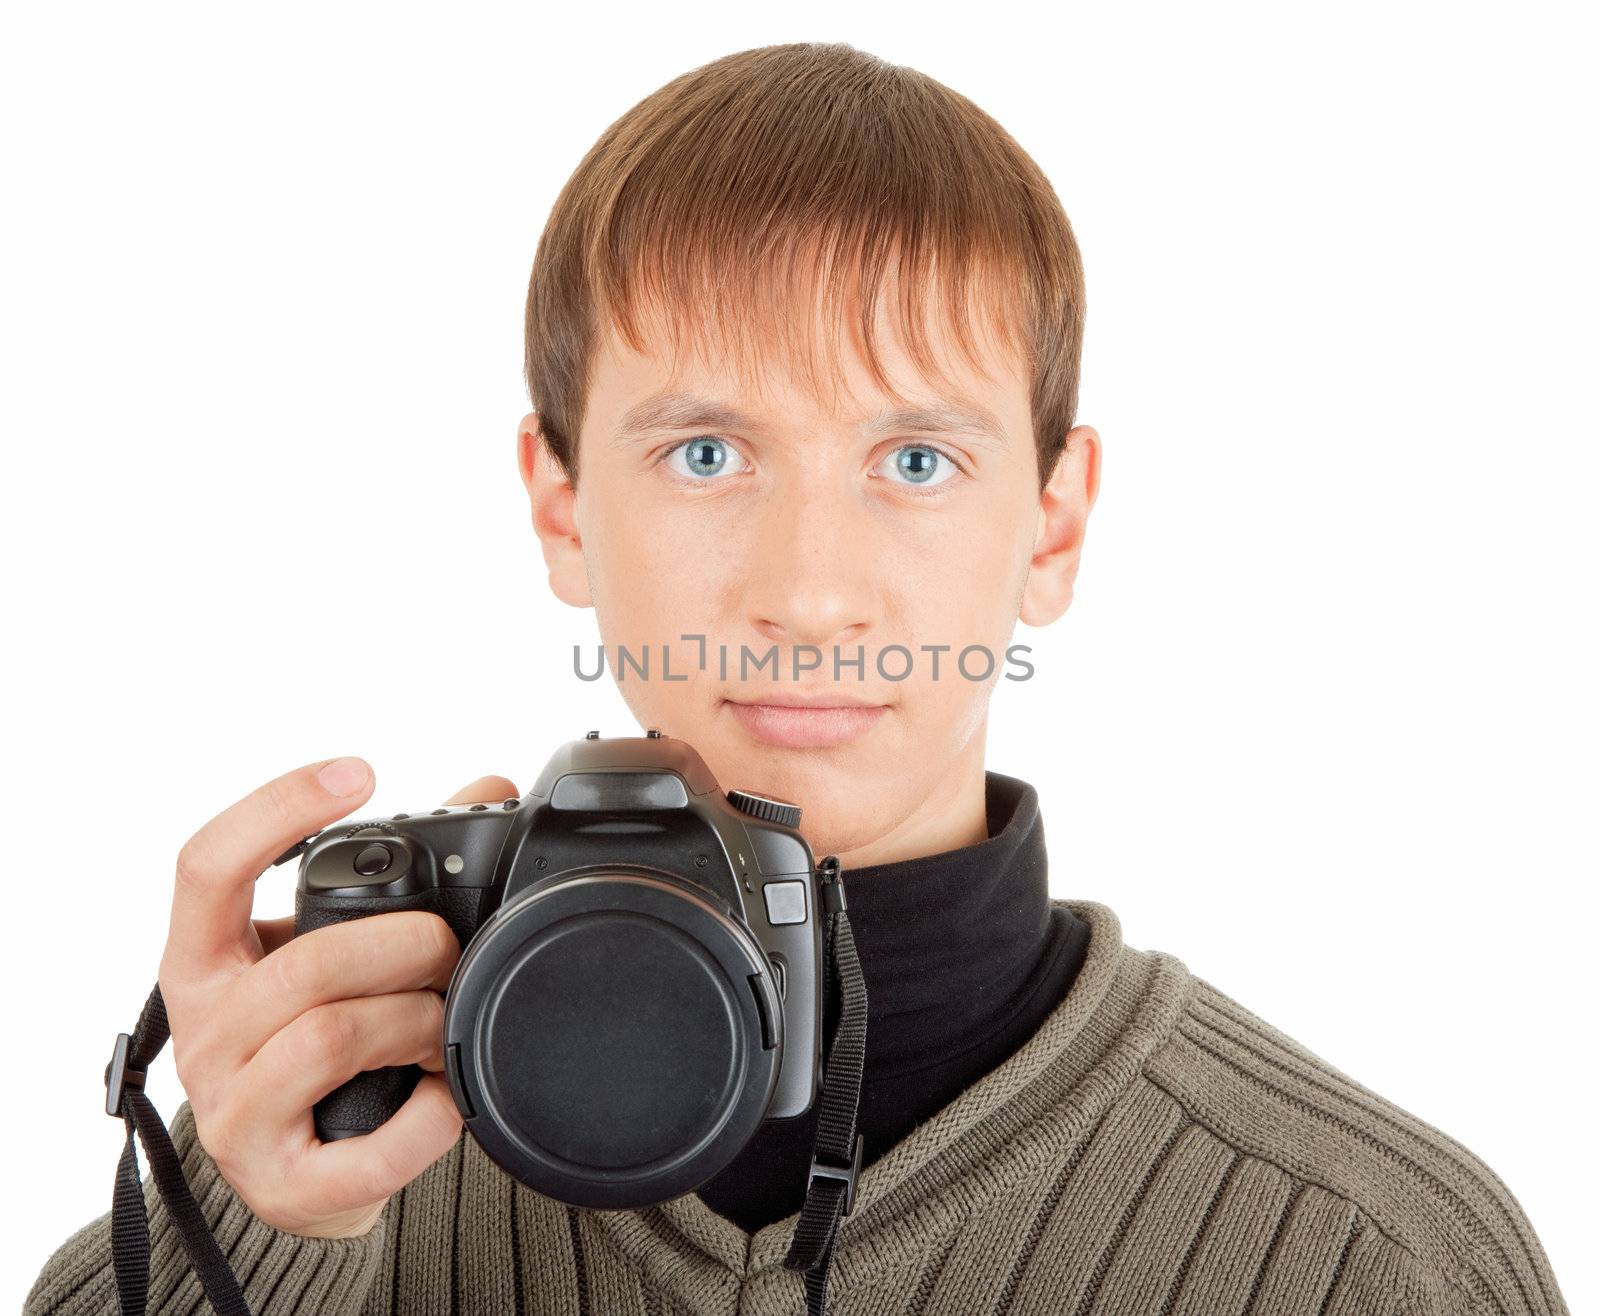 photografer with a photocamera close up on white background